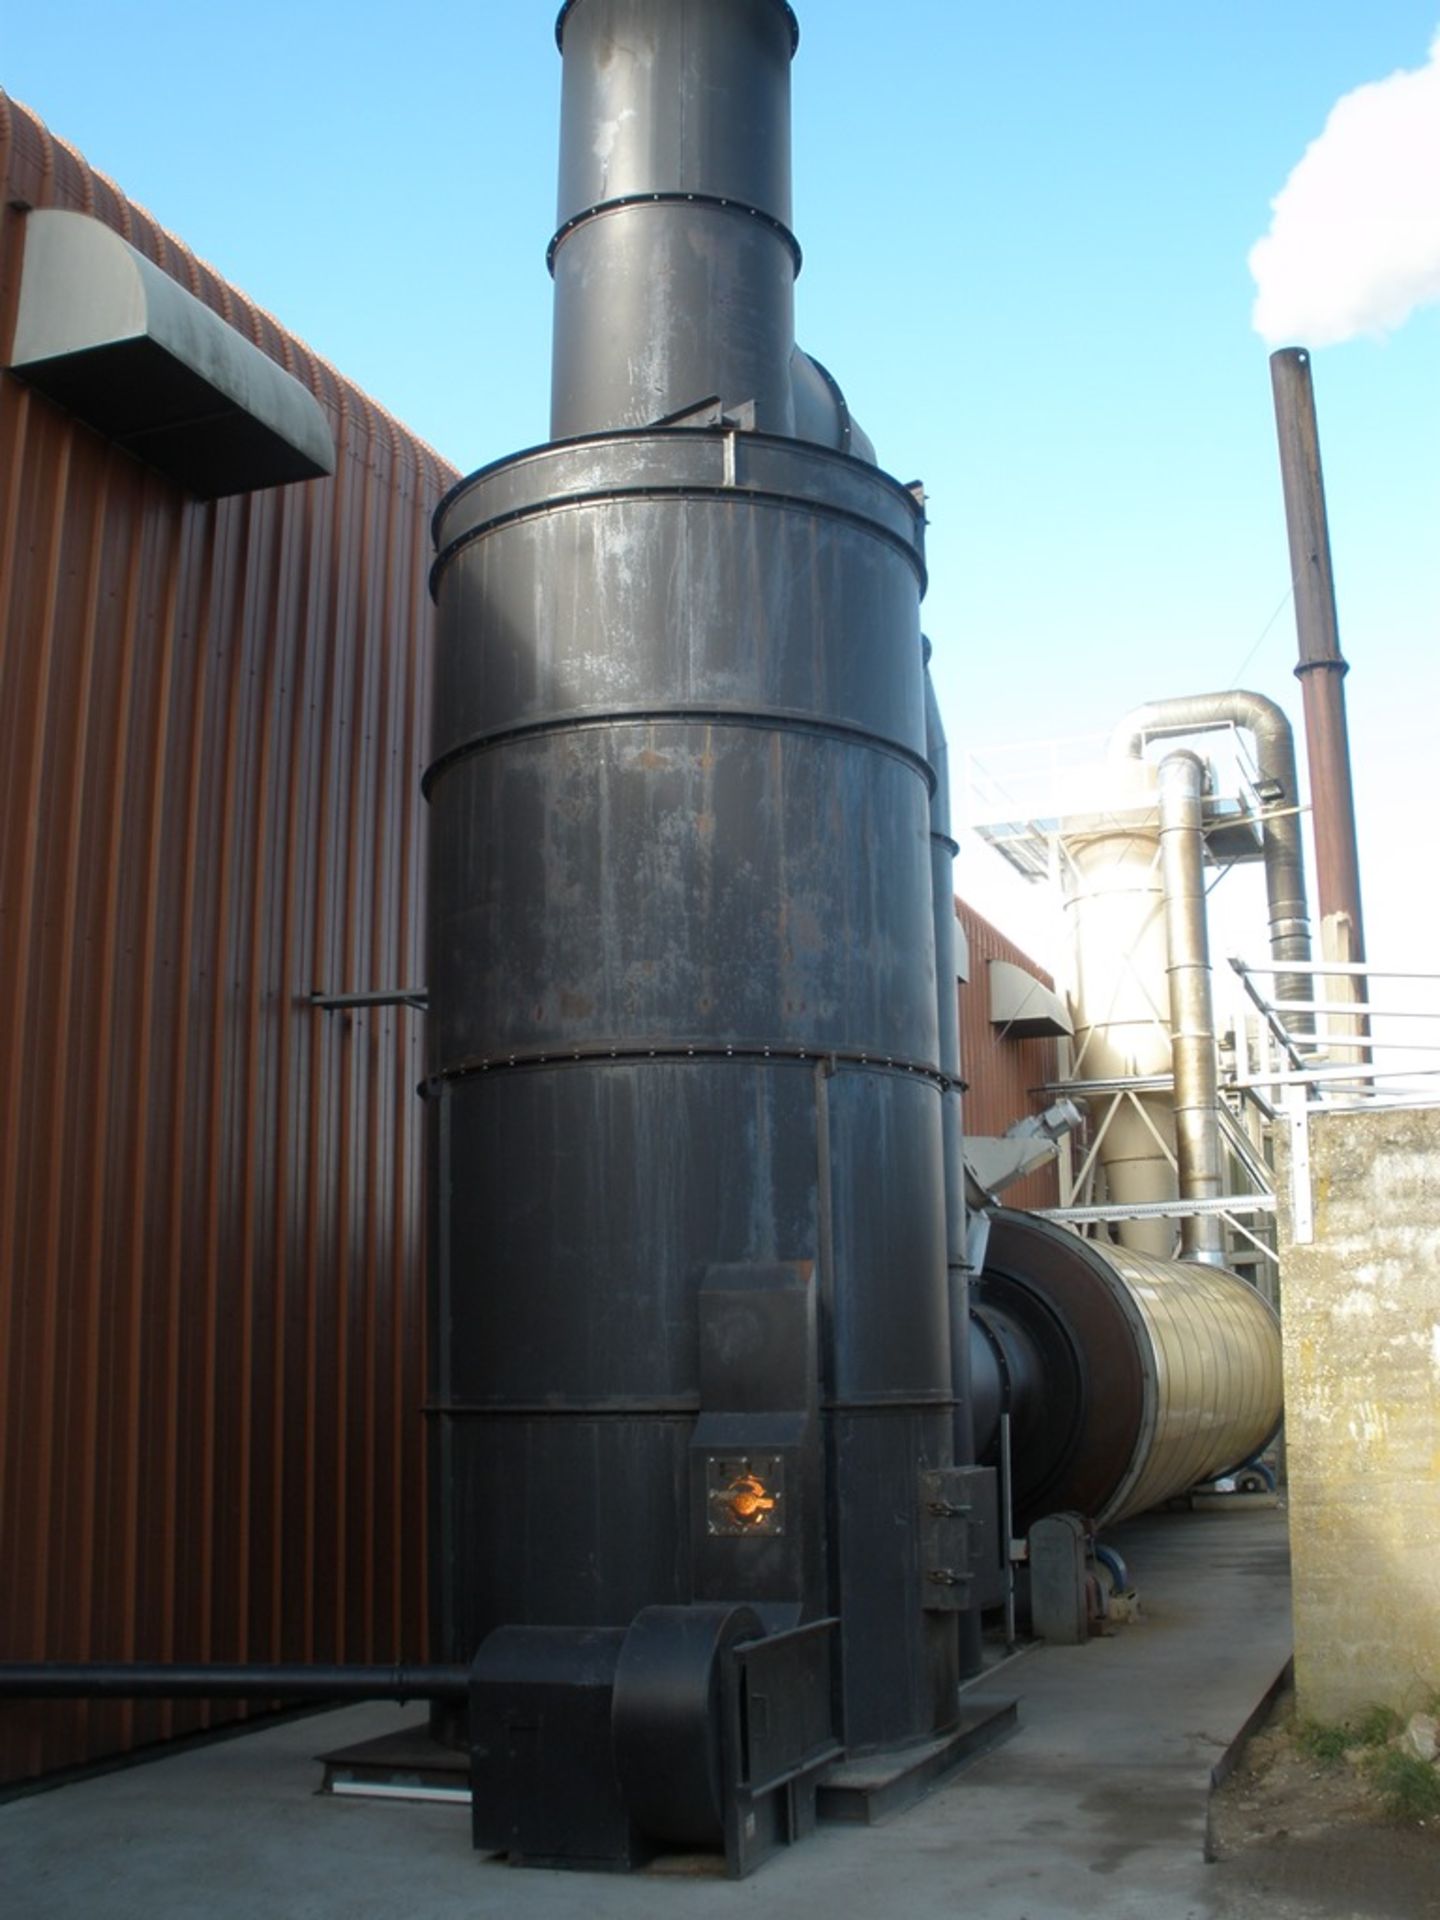 Furnace - Energy Unlimited Biomass Burner, believed built in 2008. It has an output of 5MW - Image 4 of 5